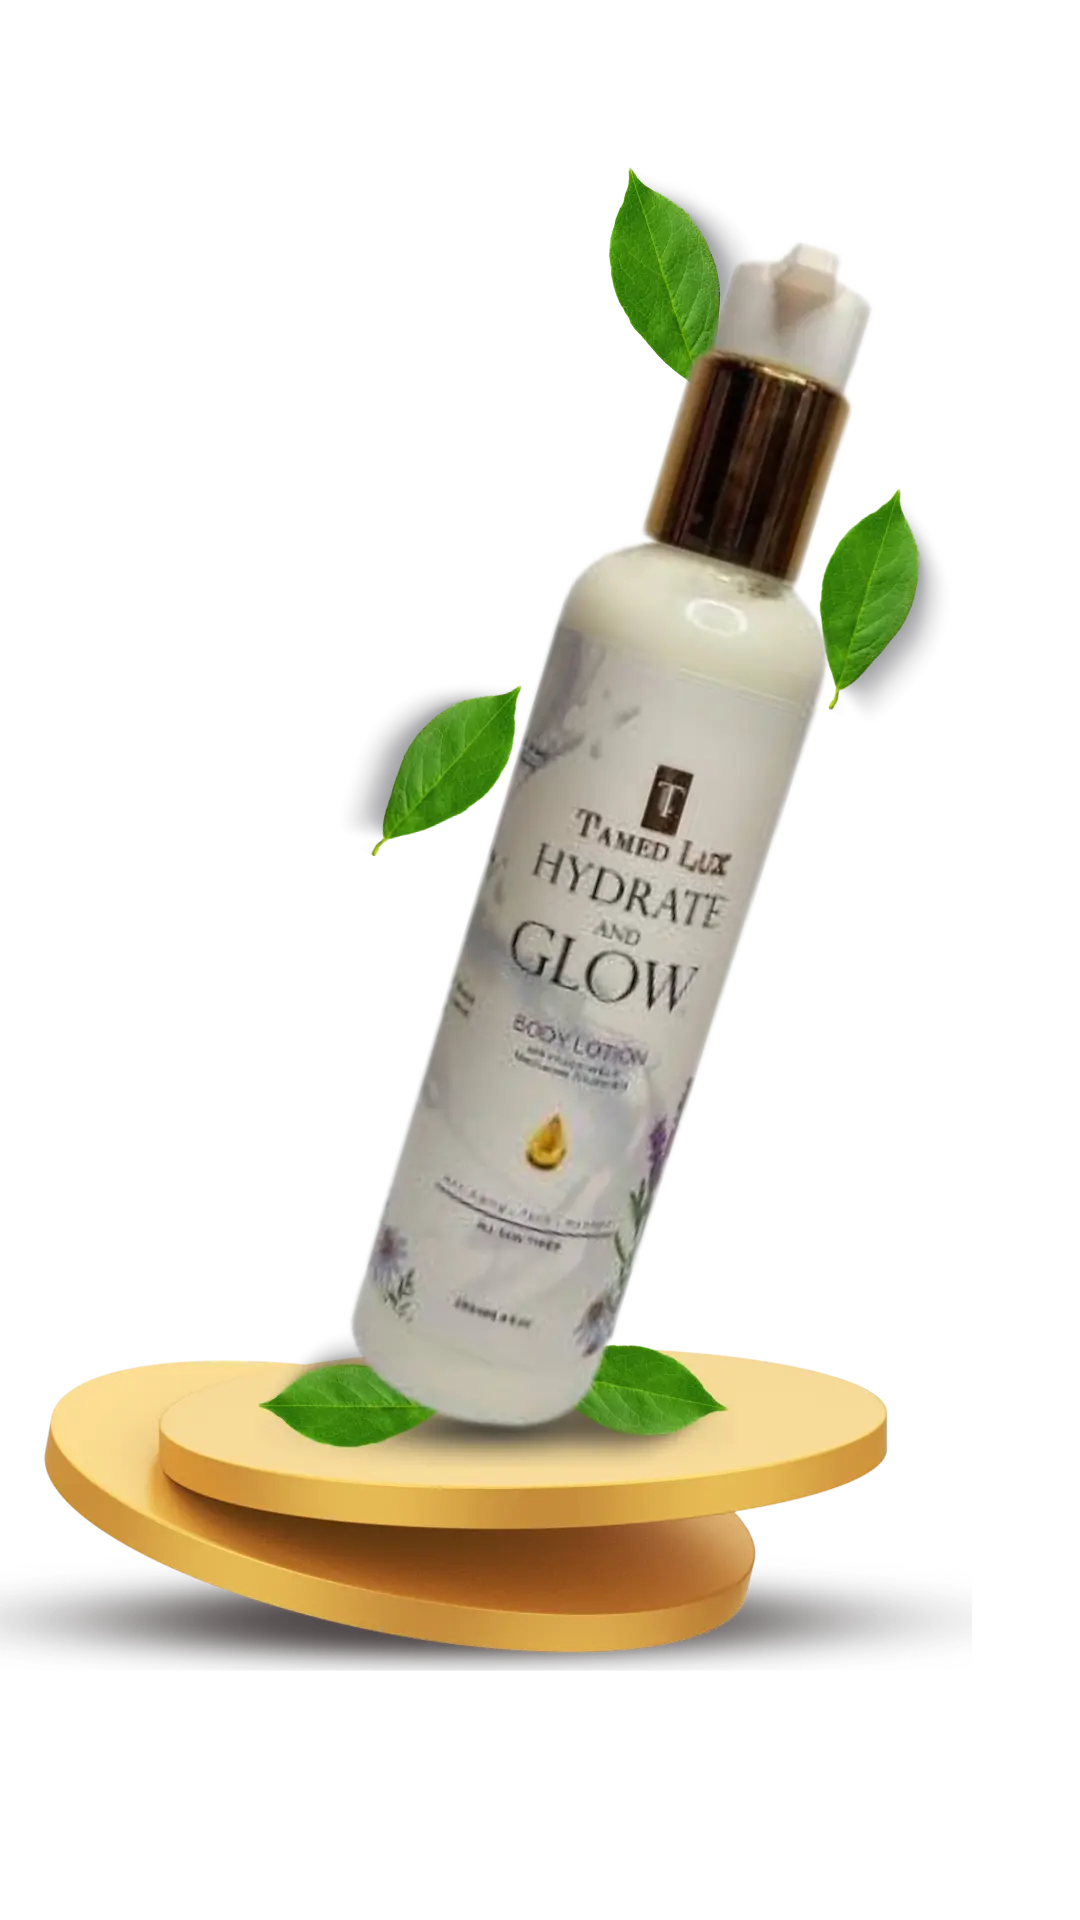 A white plastic bottle of hydrate and glow body lotion